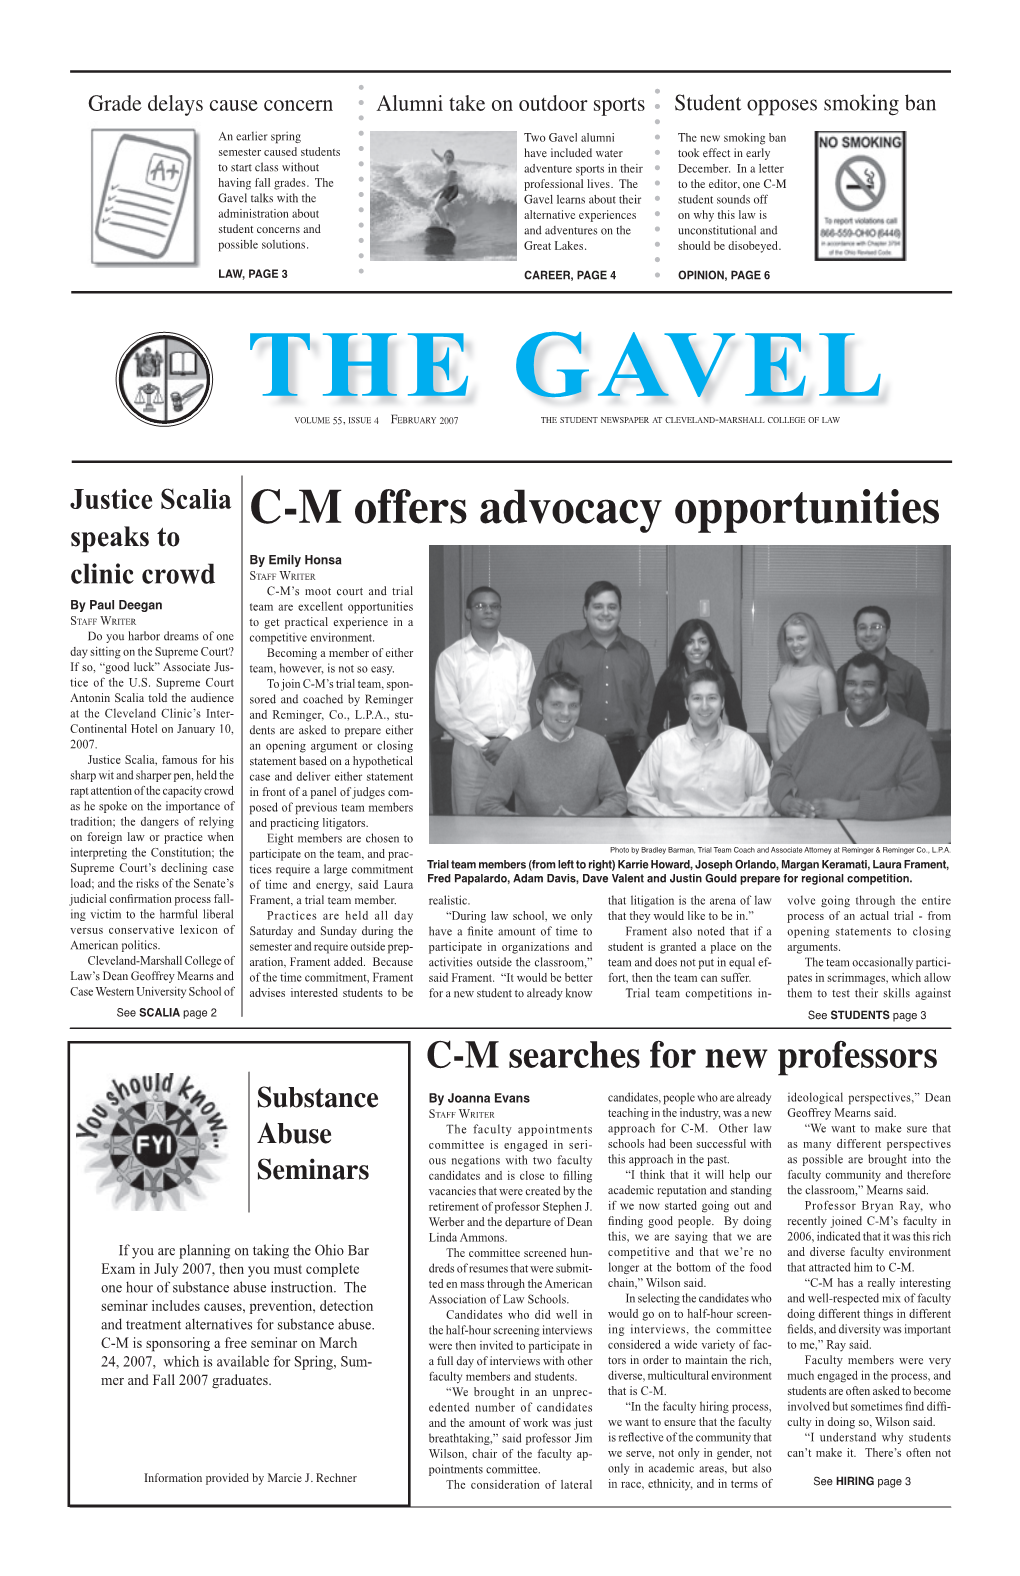 February 2007 the Student Newspaper at Cleveland-Marshall College of Law